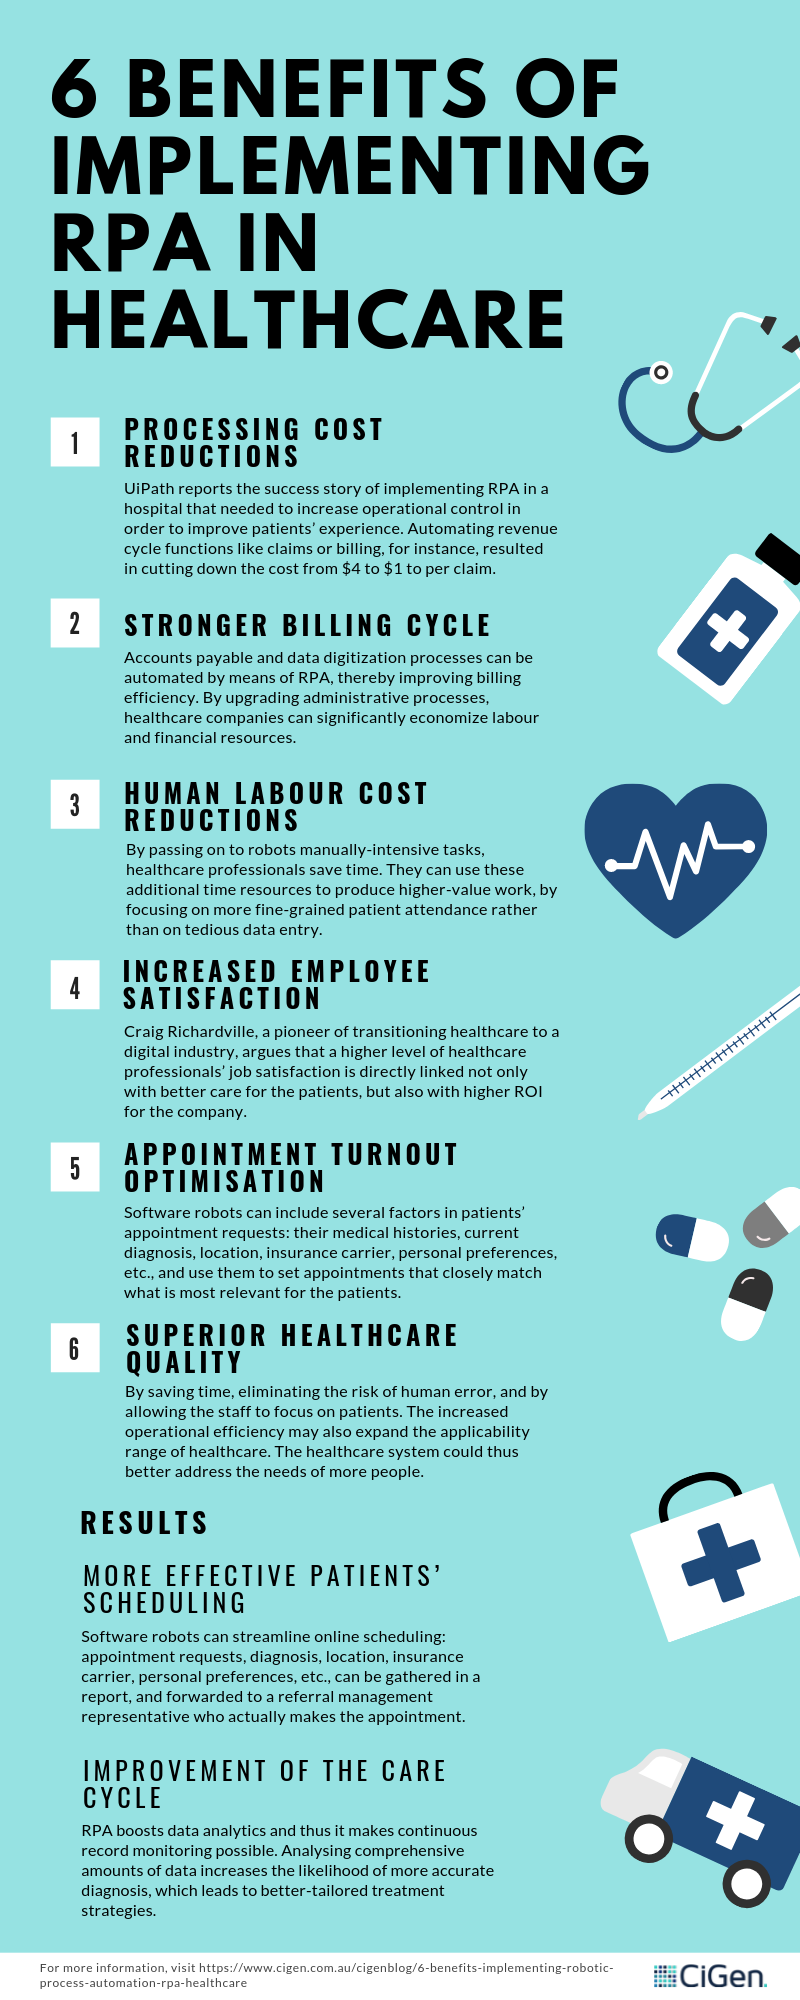 CiGen-robotic-process-automation-Australia-6-Benefits-of-Implementing-RPA-in-Healthcare-infographic.png